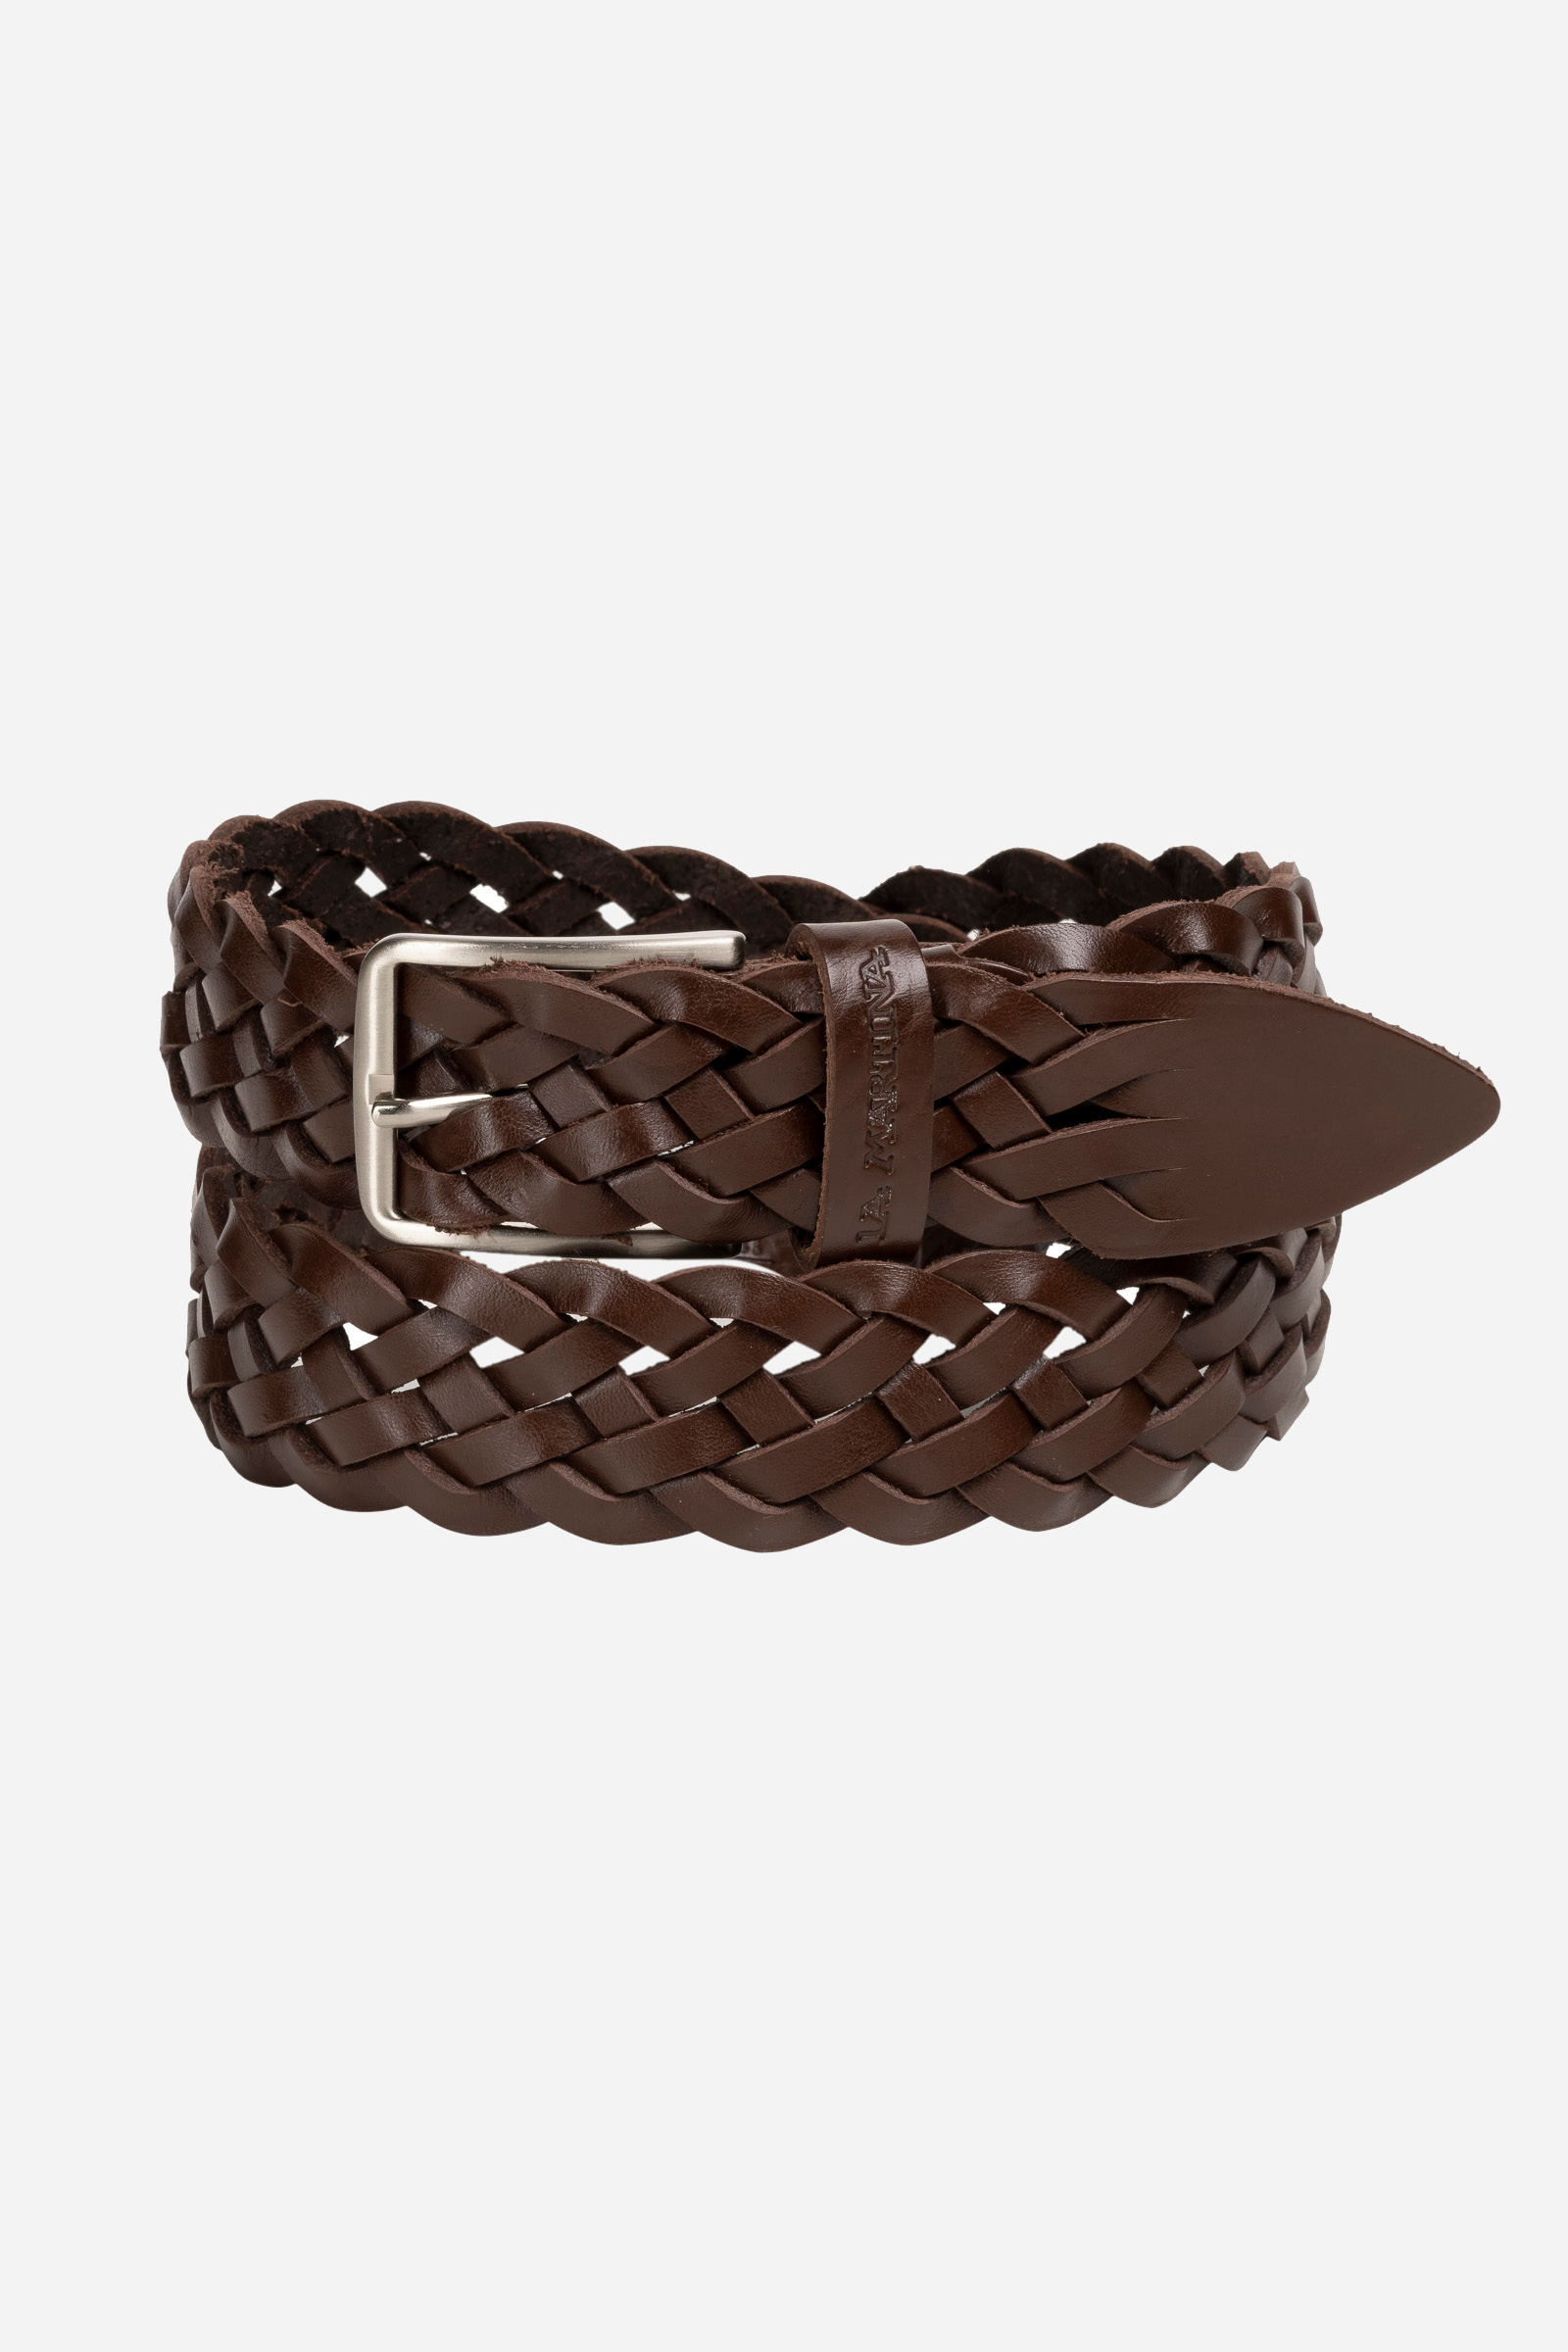 Baby and Toddler Girls Leather Braided Belt Brown 